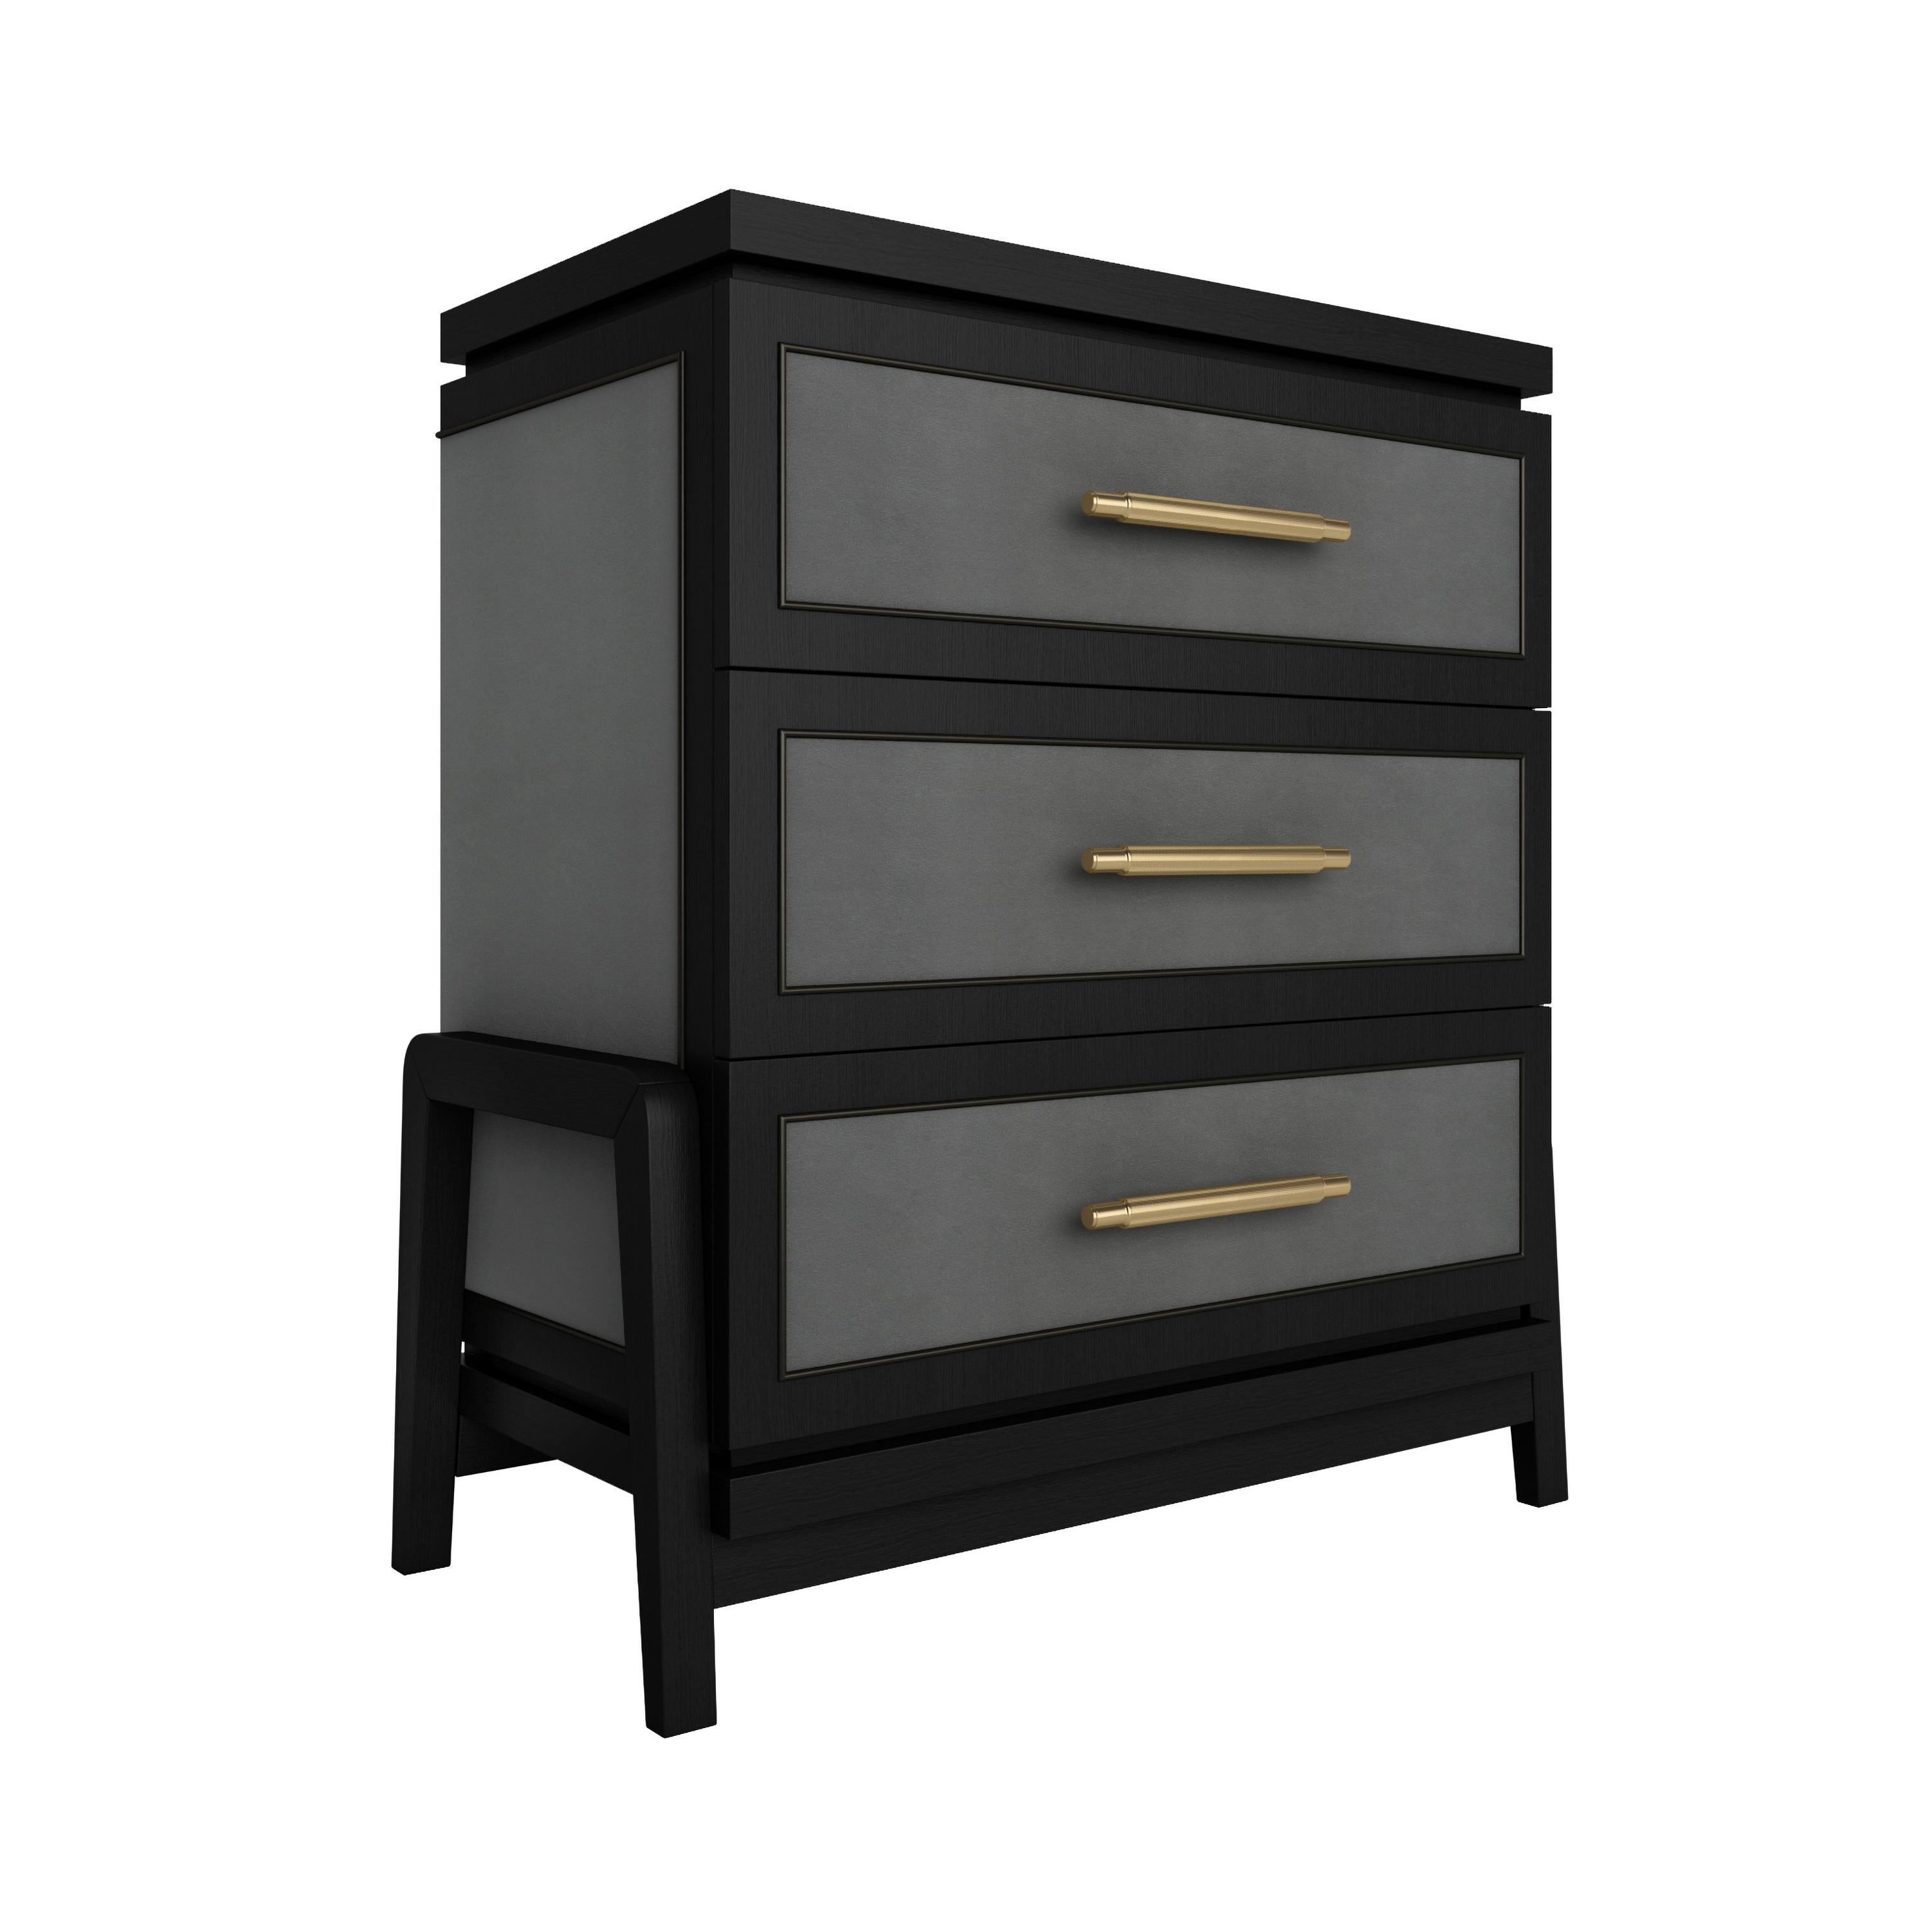 Prepare to be seduced by the Cupid Chest of Drawers - a daring and provocative creation that embodies the fearless spirit of the Roman God of Desire. This piece demands attention with its exotic textures, sharp lines, and moody tones that evoke a